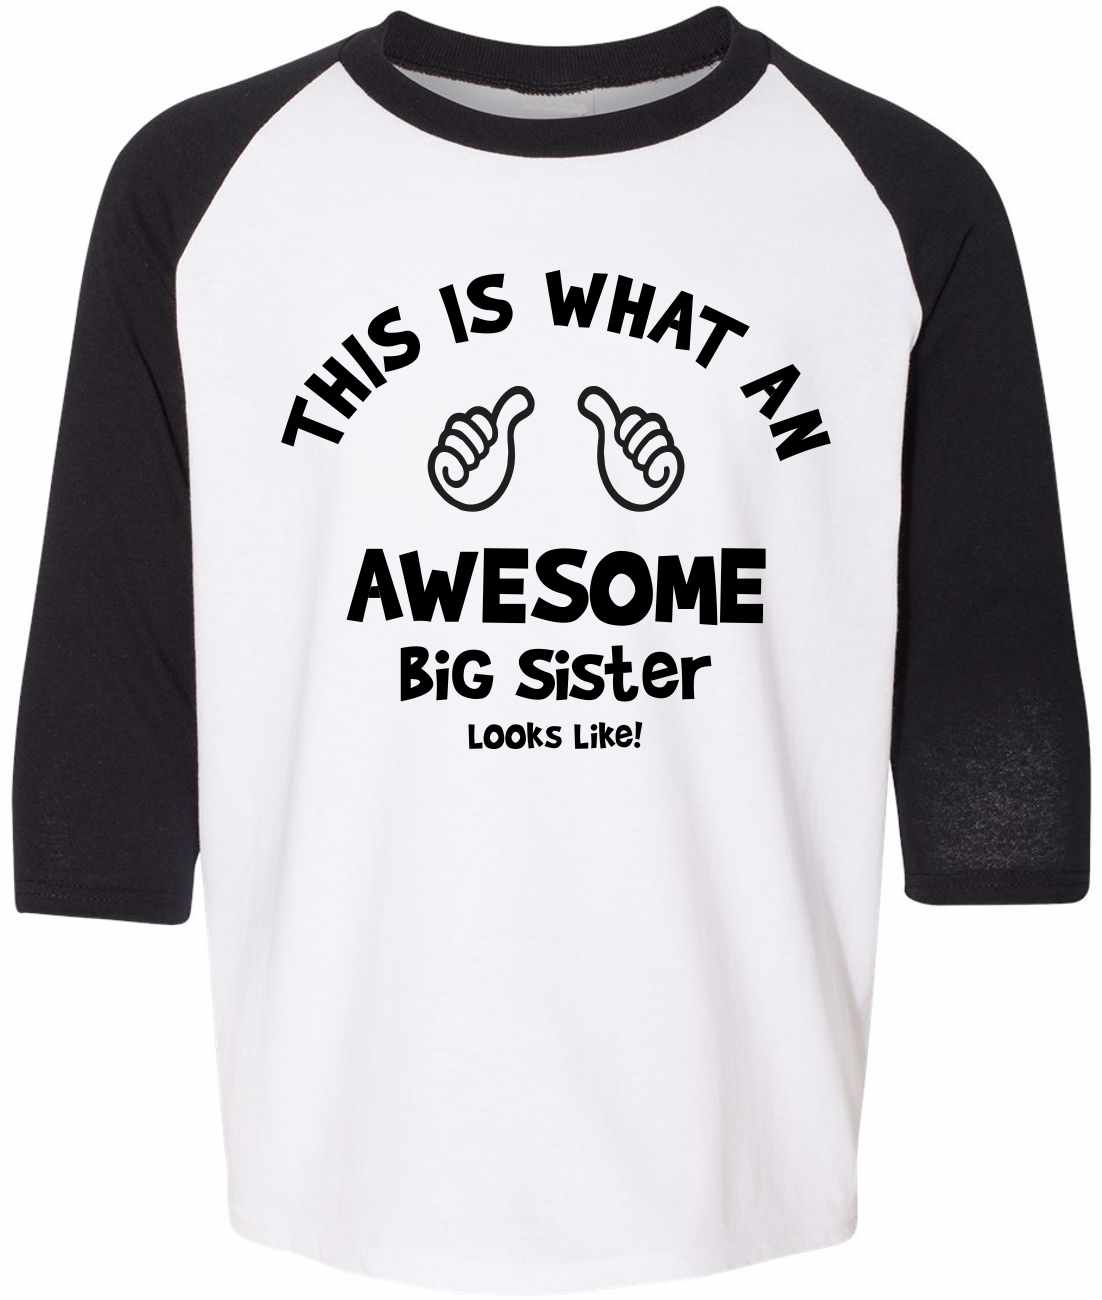 This is What an AWESOME BIG SISTER Looks Like on Youth Baseball Shirt (#969-212)